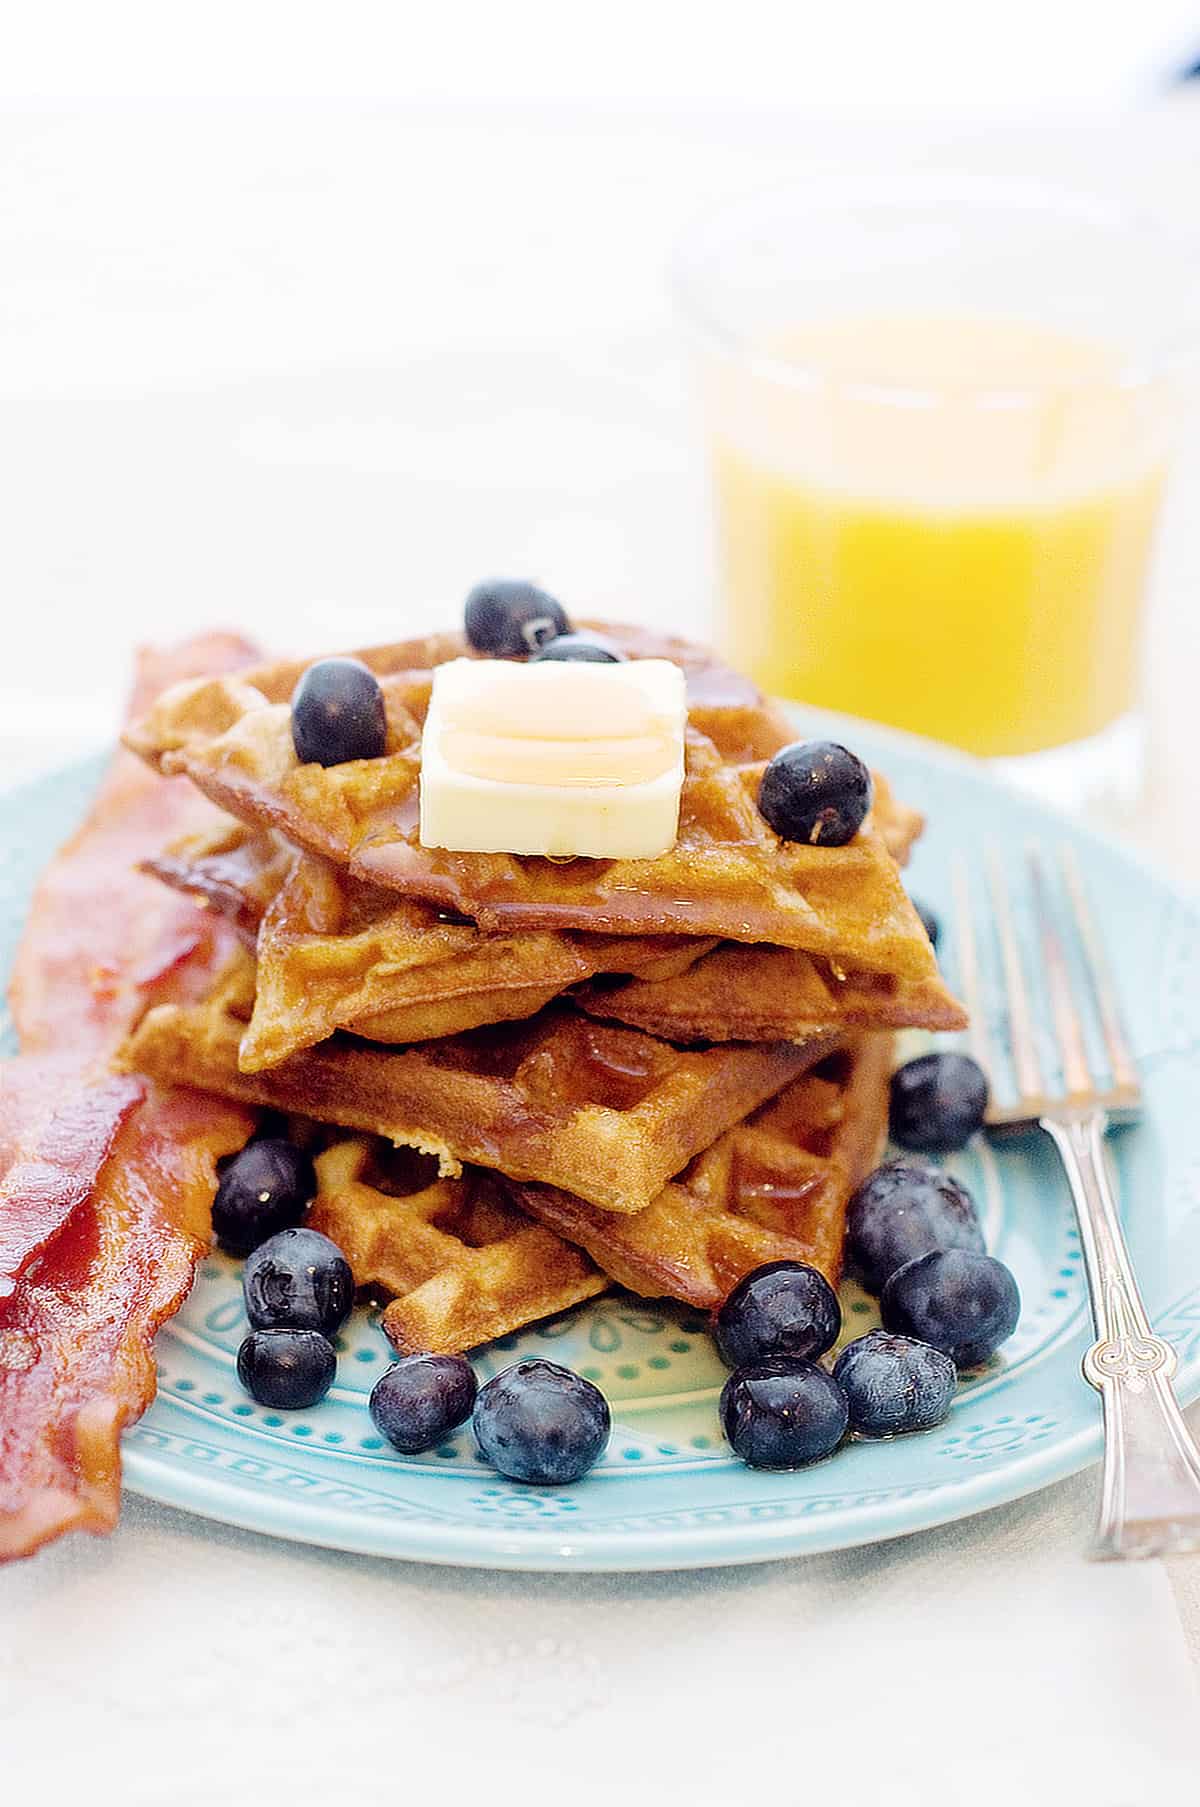 A stack of waffles garnished with fresh blueberries.